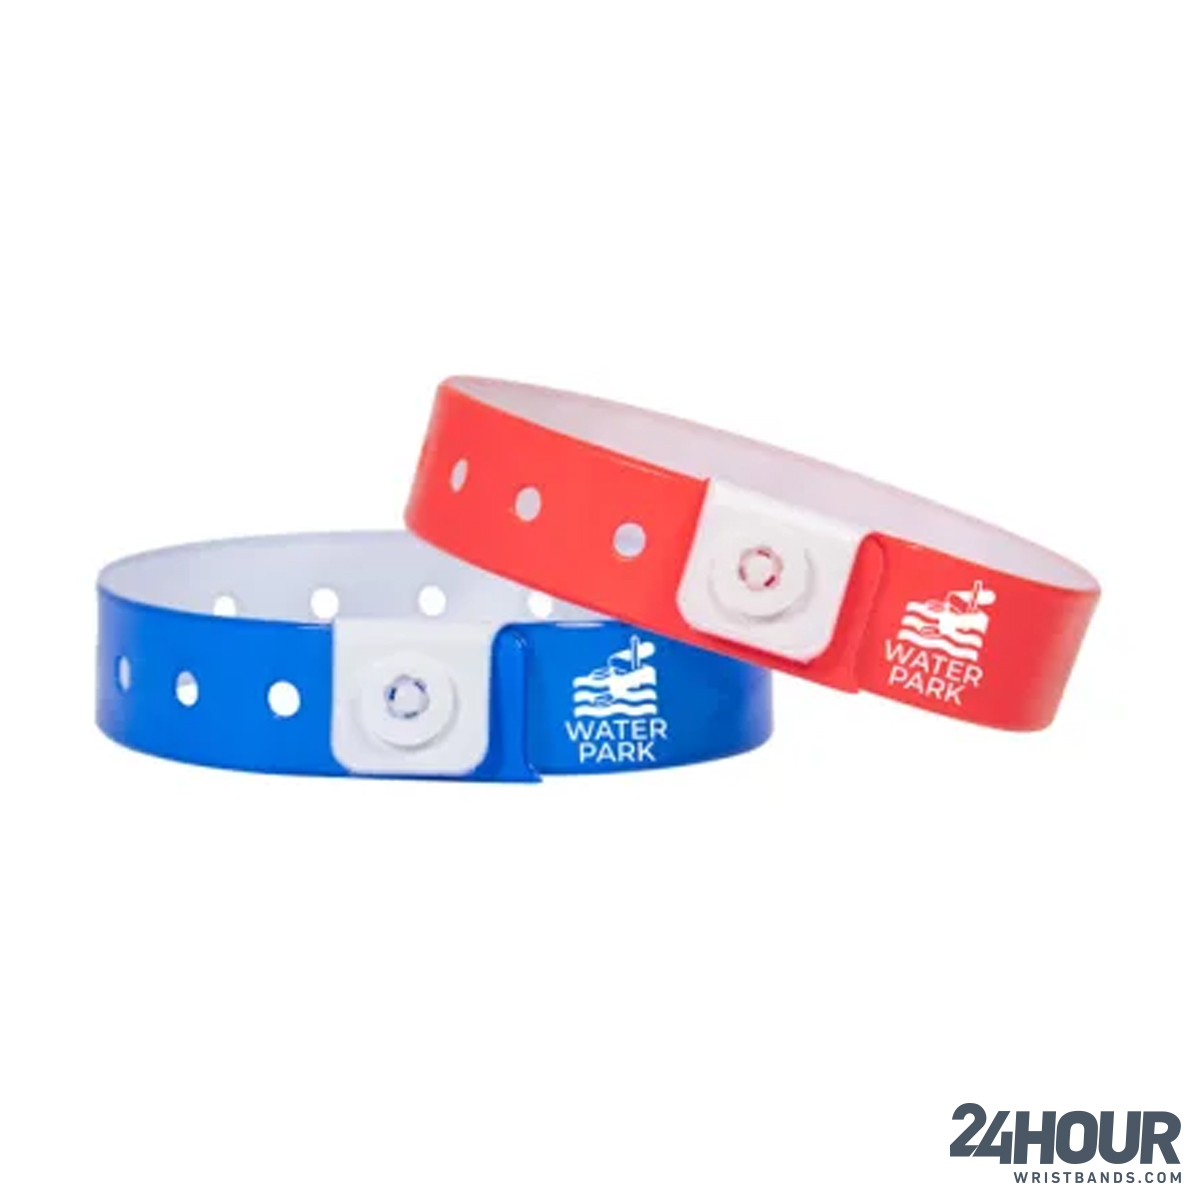 Campground Wristbands: What You Need to Know - 24hourwristbands Blog